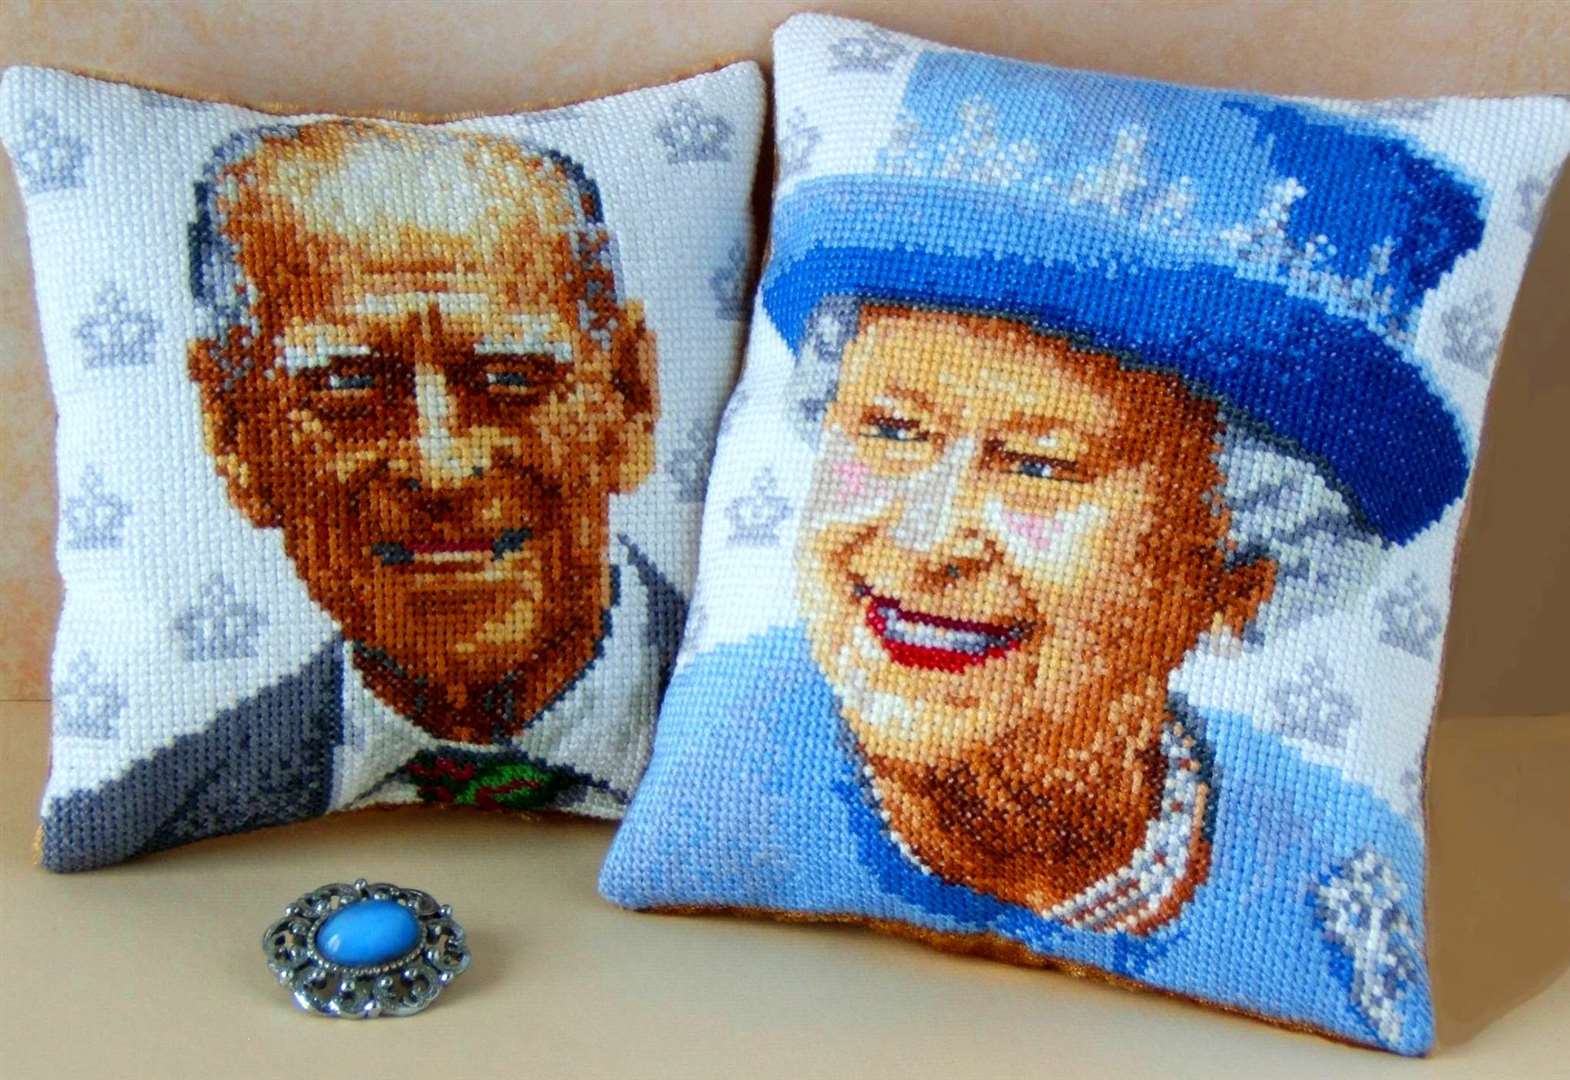 Portraits of the Queen and Prince Philip